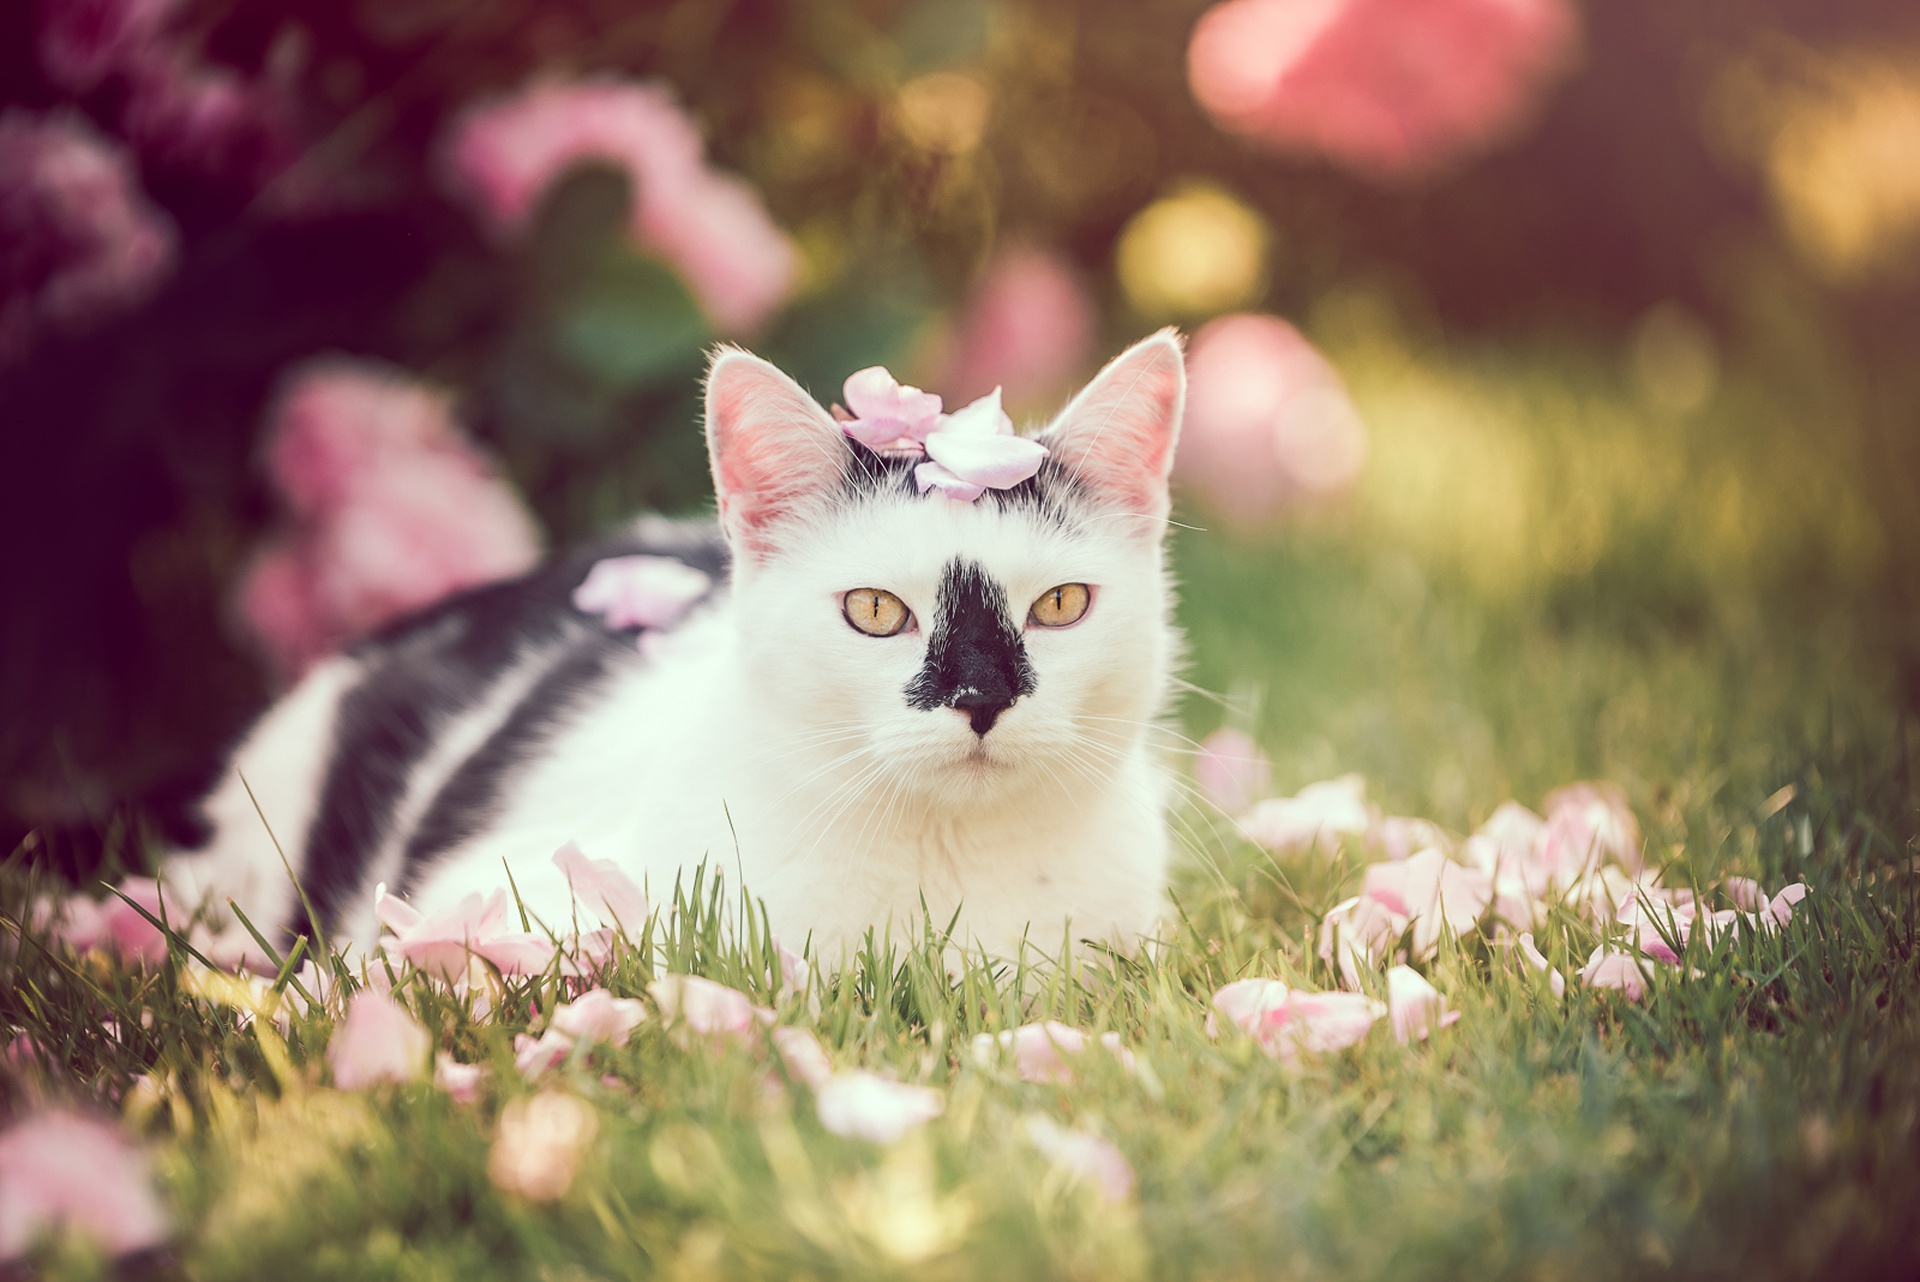 General 1920x1282 cats animals mammals colorful outdoors plants grass yellow eyes animal eyes leaves